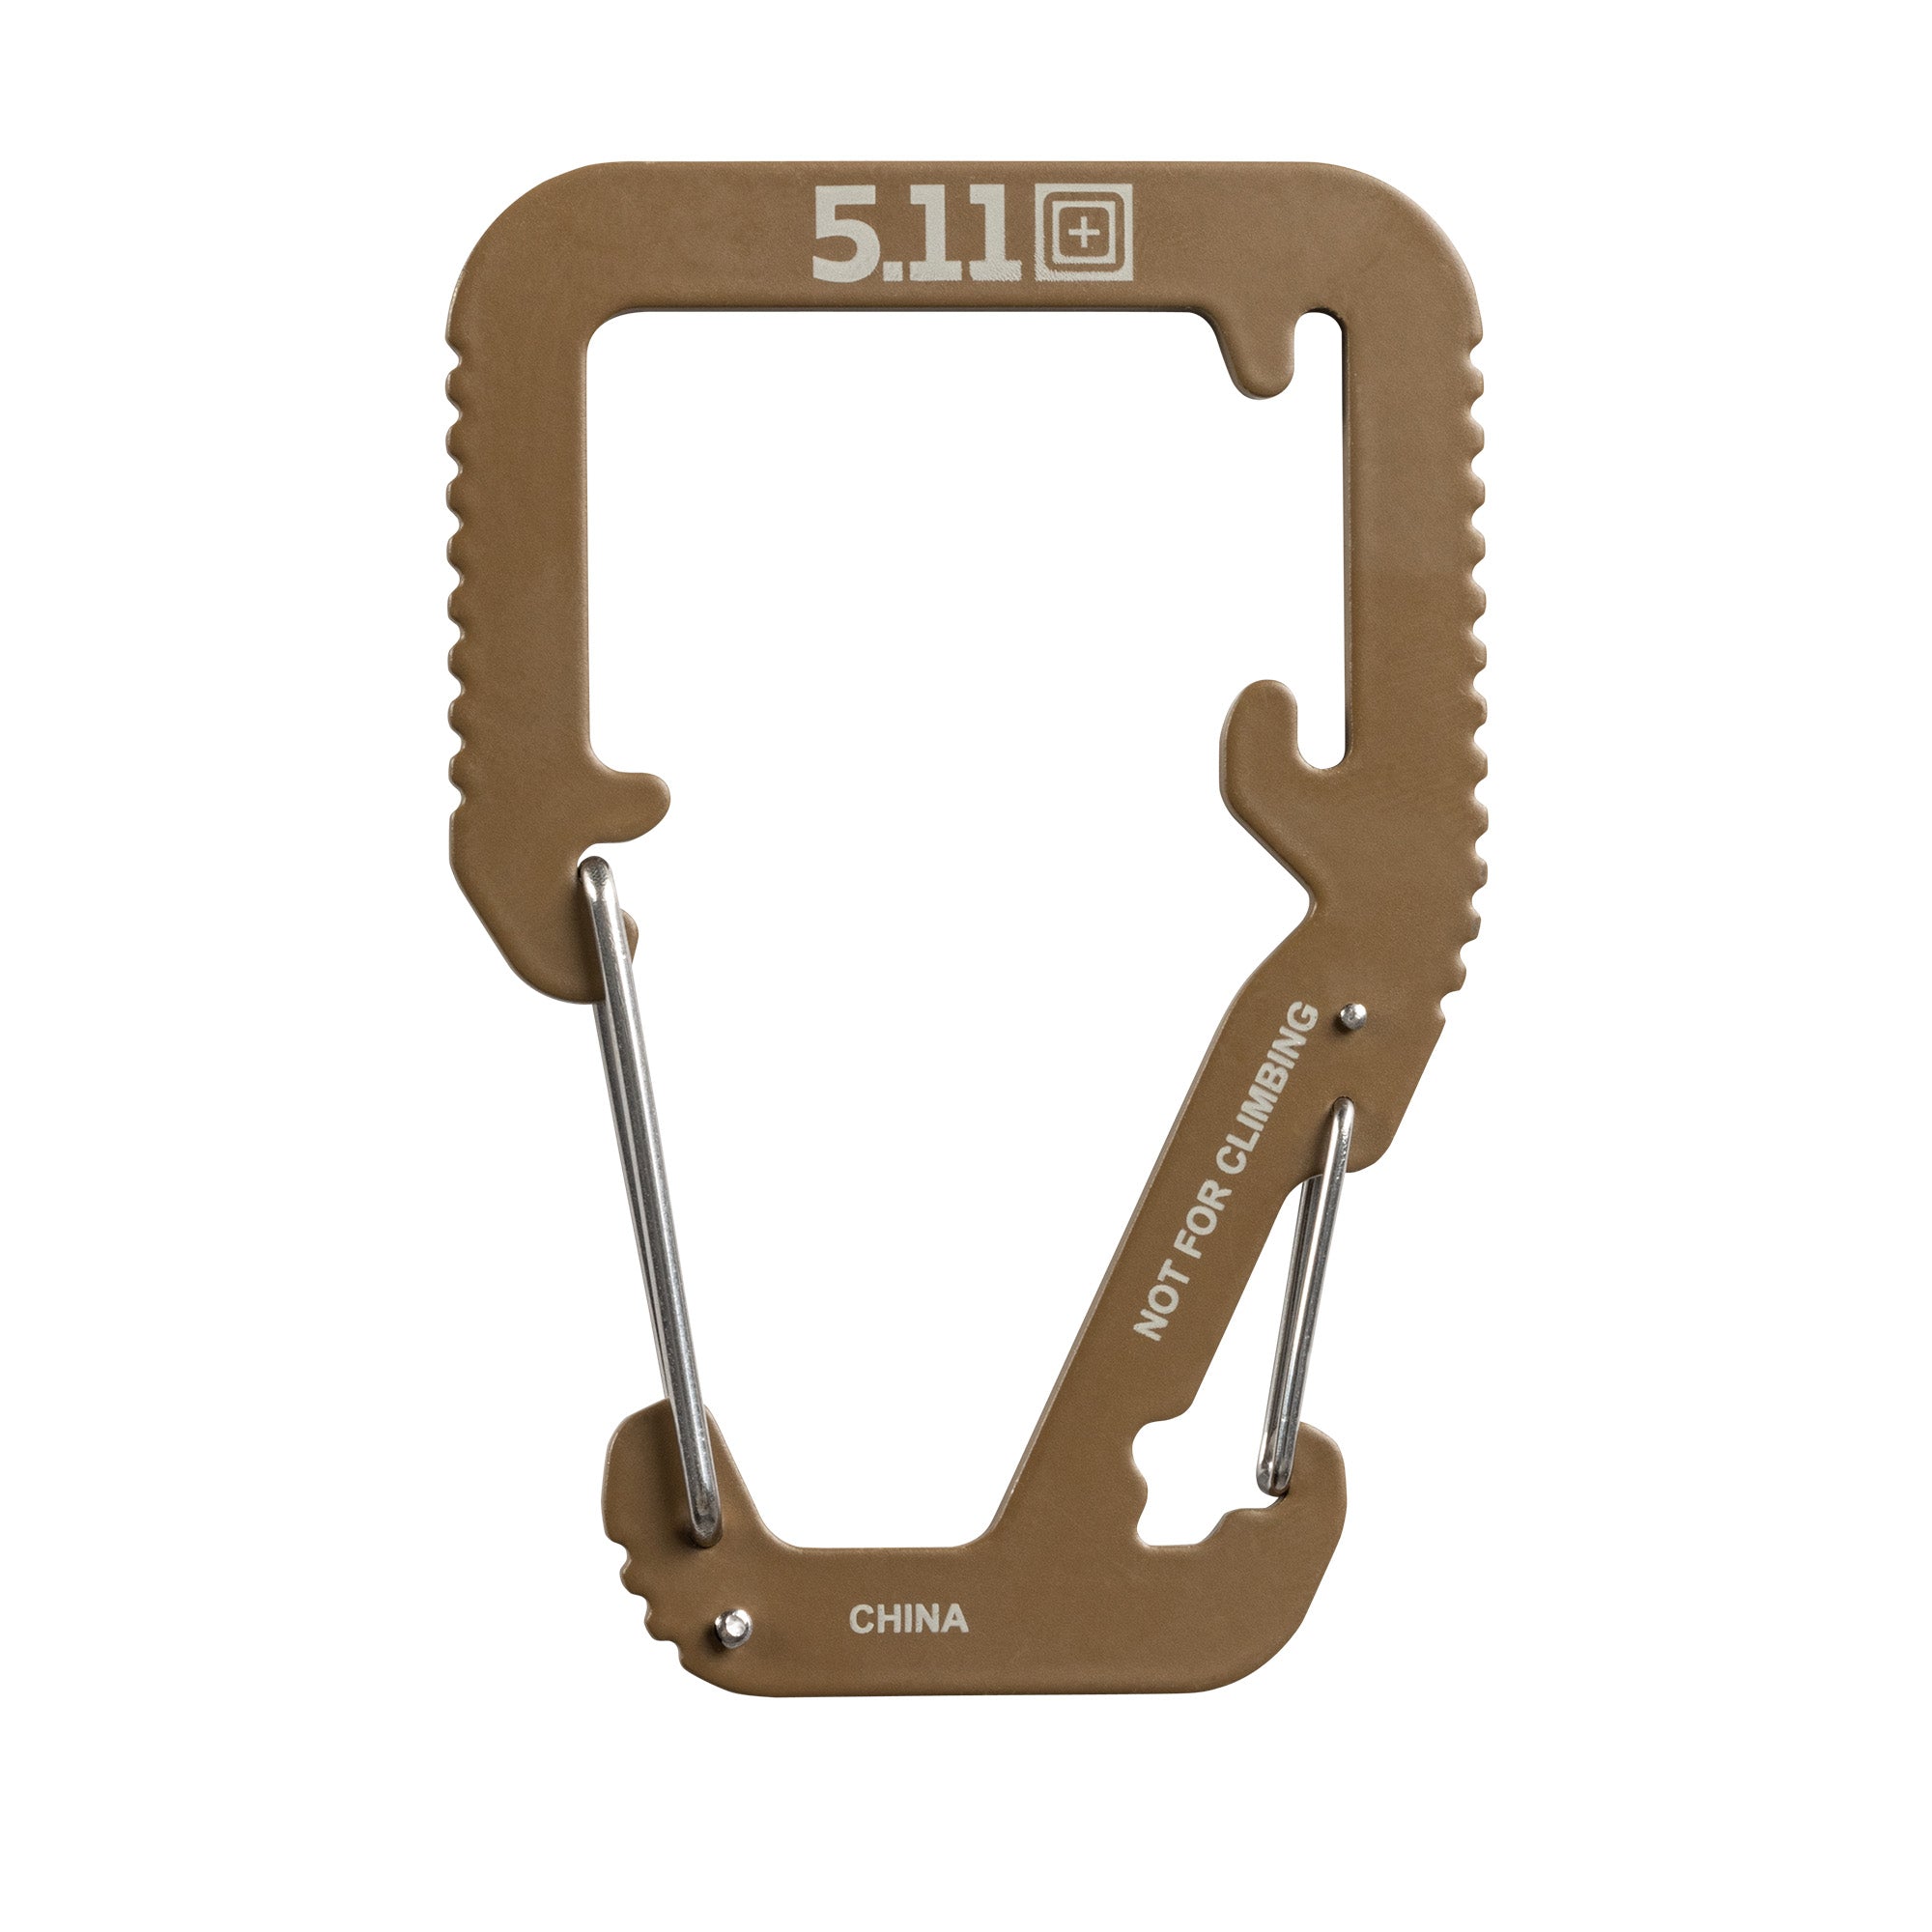 5.11 Tactical Hardpoint M3 Carabiner Outdoor and Survival 5.11 Tactical Tactical Gear Supplier Tactical Distributors Australia